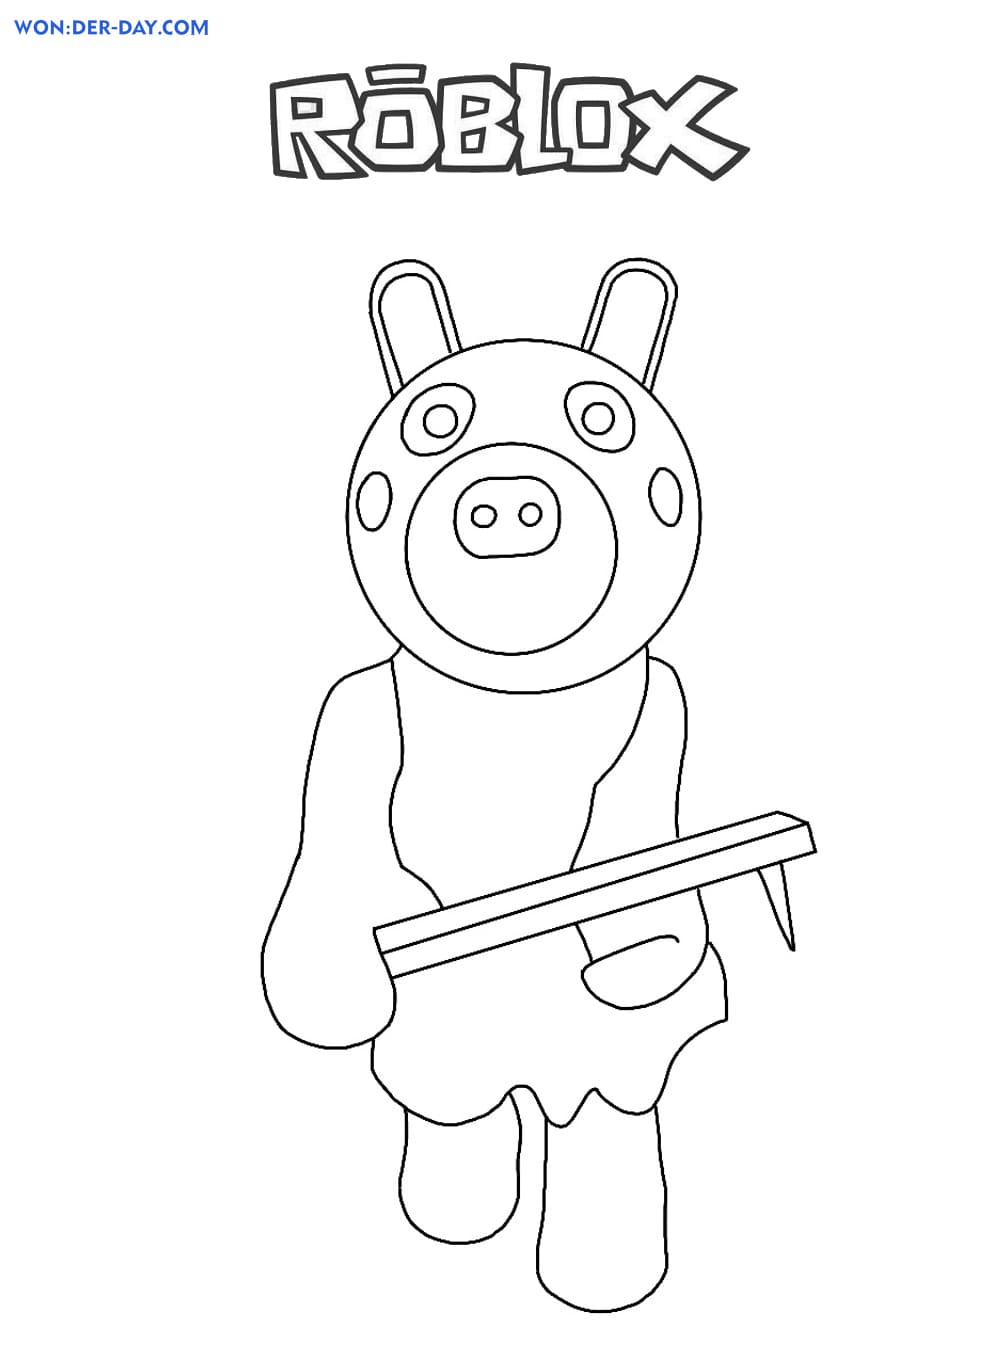 Piggy Roblox Coloring Pages Wonder Day Coloring Pages For Children And Adults - roblox piggy mr p coloring pages